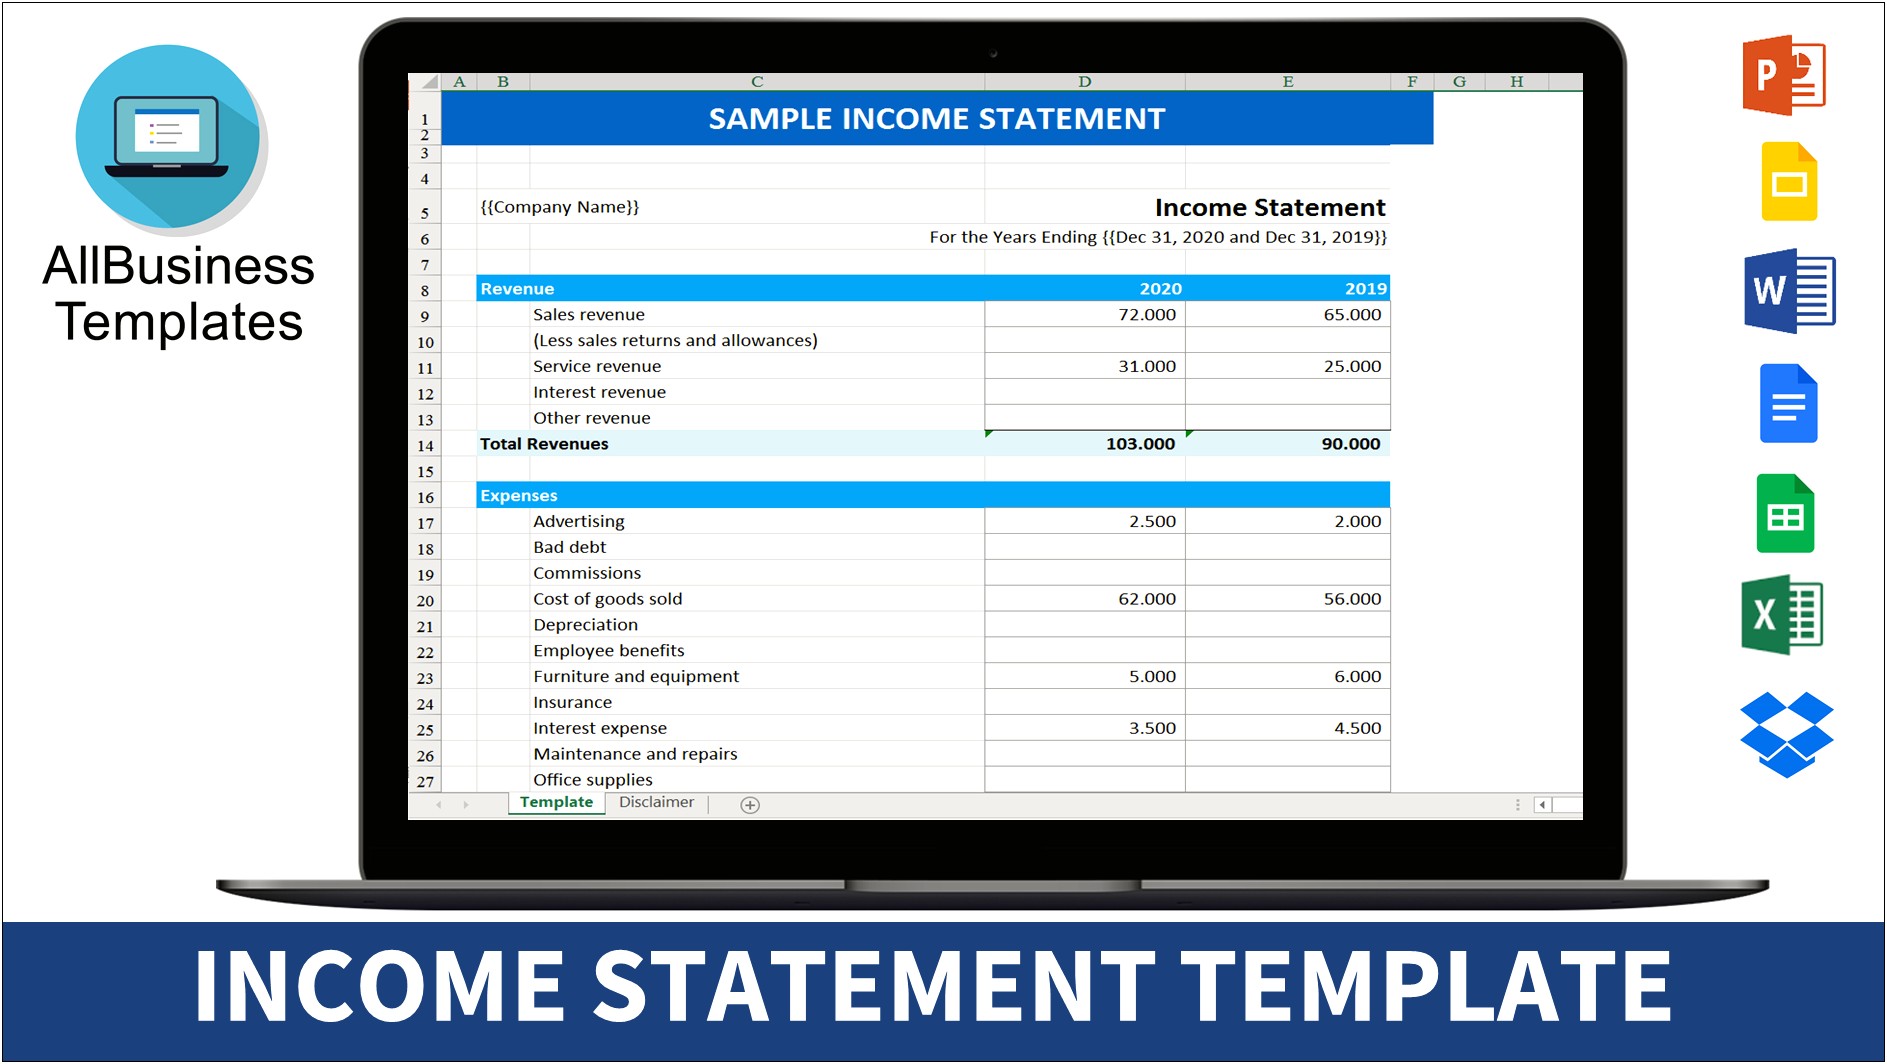 Income Statement Excel Template Free Download